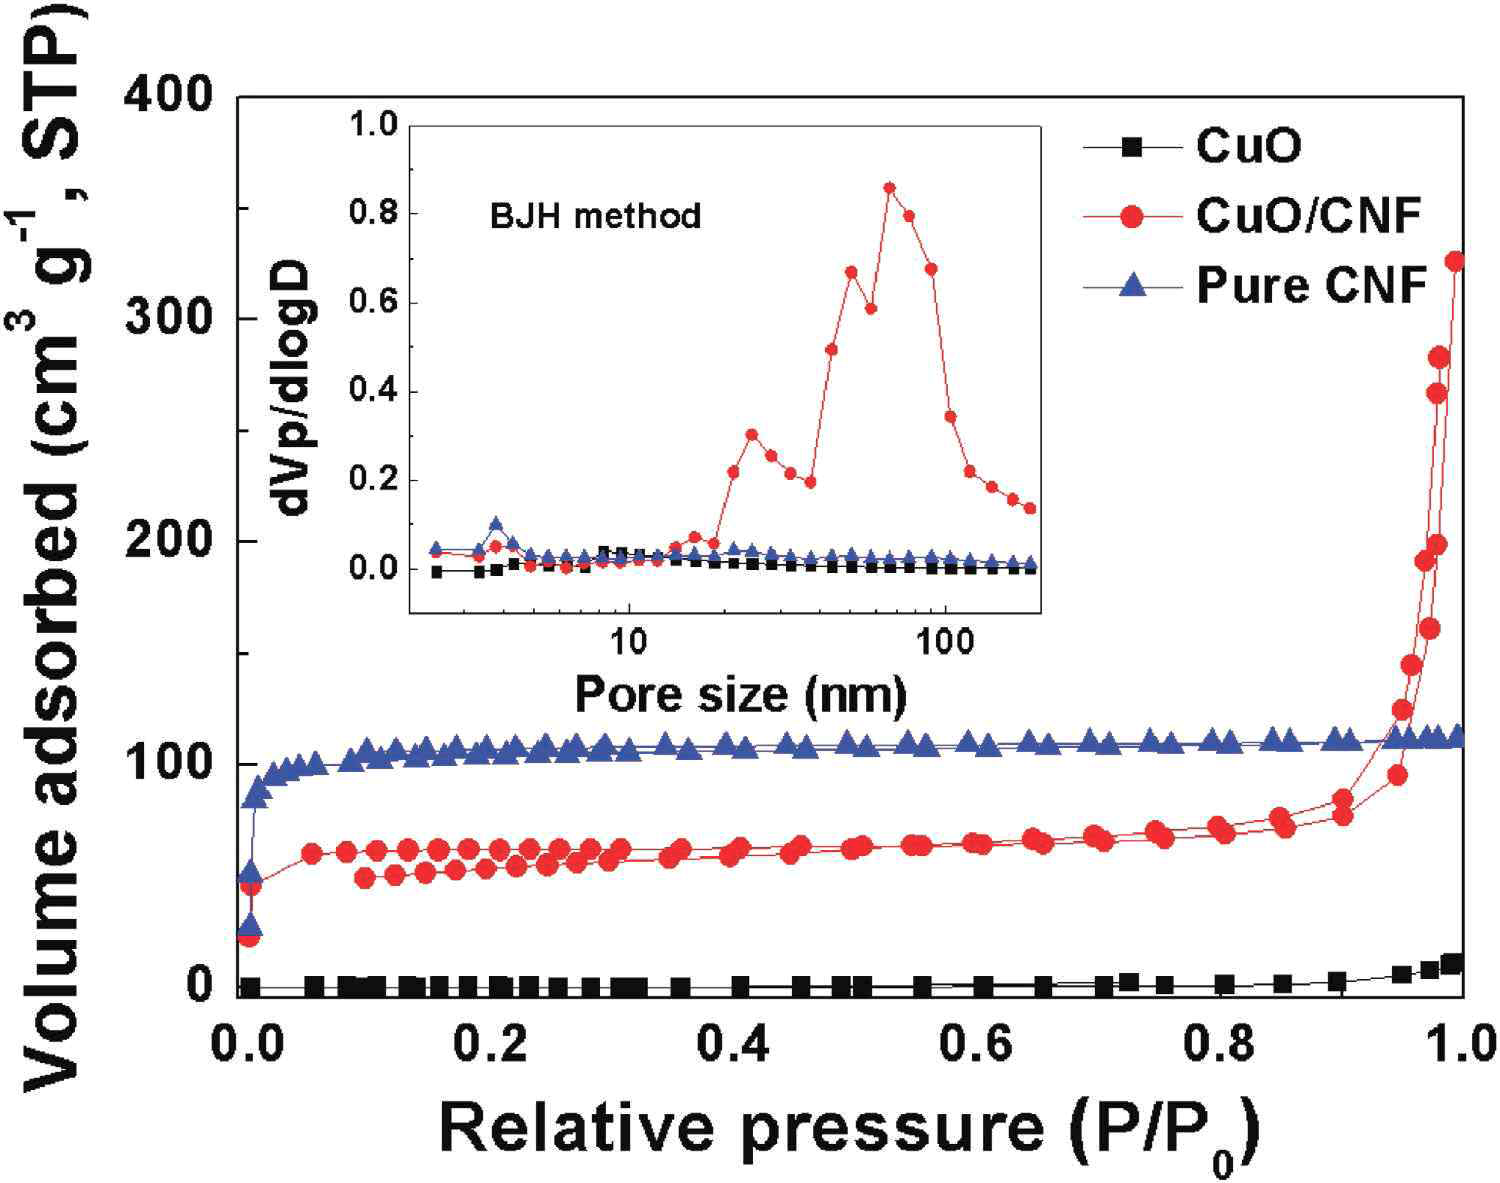 N2 sorption isotherms and pore size distribution of CNF, CuO and CuO/CNF.